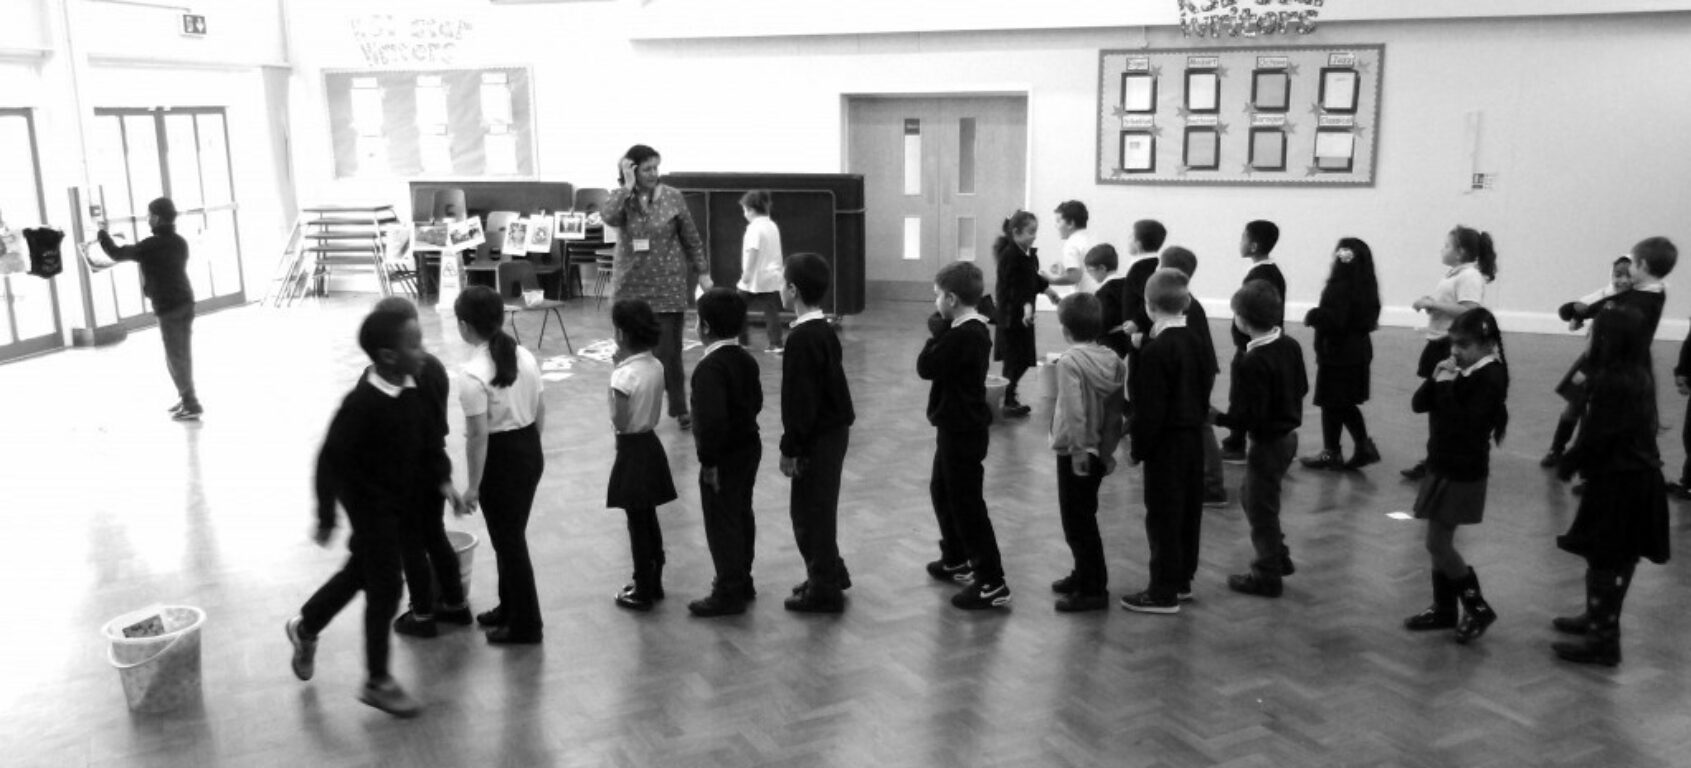 Black and white photograph of children in a school hall lining up to participate in an activity.